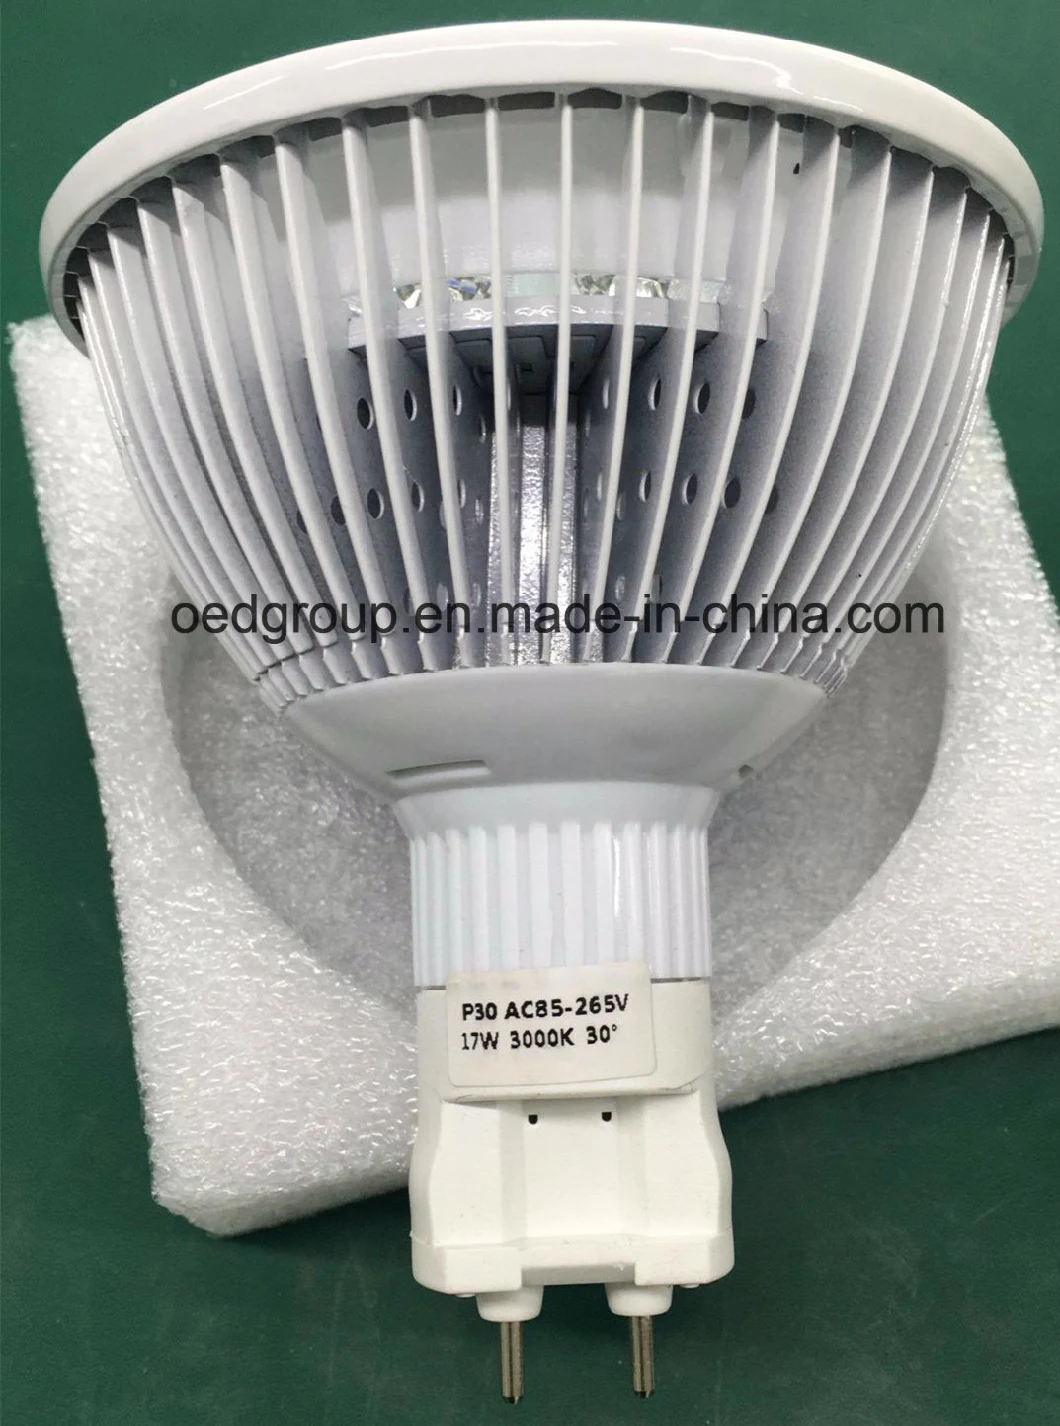 G12 G8.5 17W LED Spot Lamp to Replace 170W Halogen Lamp with G12 or G8.5 Base